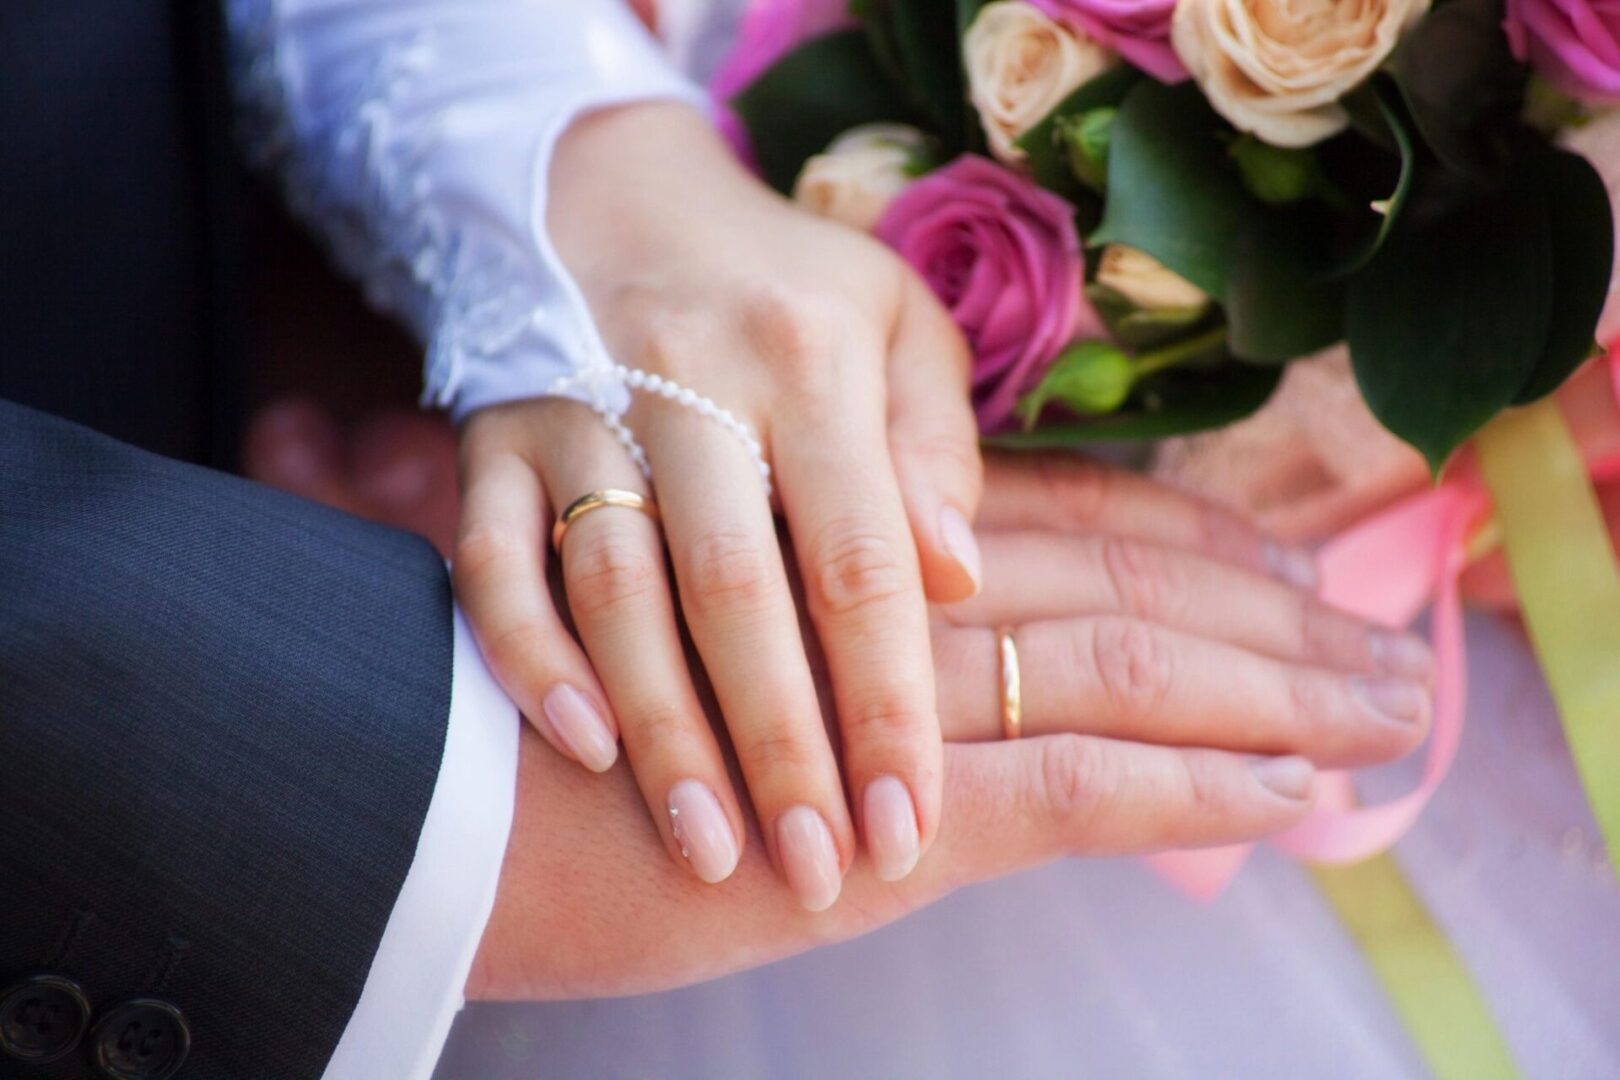 A close up of two hands with wedding rings on